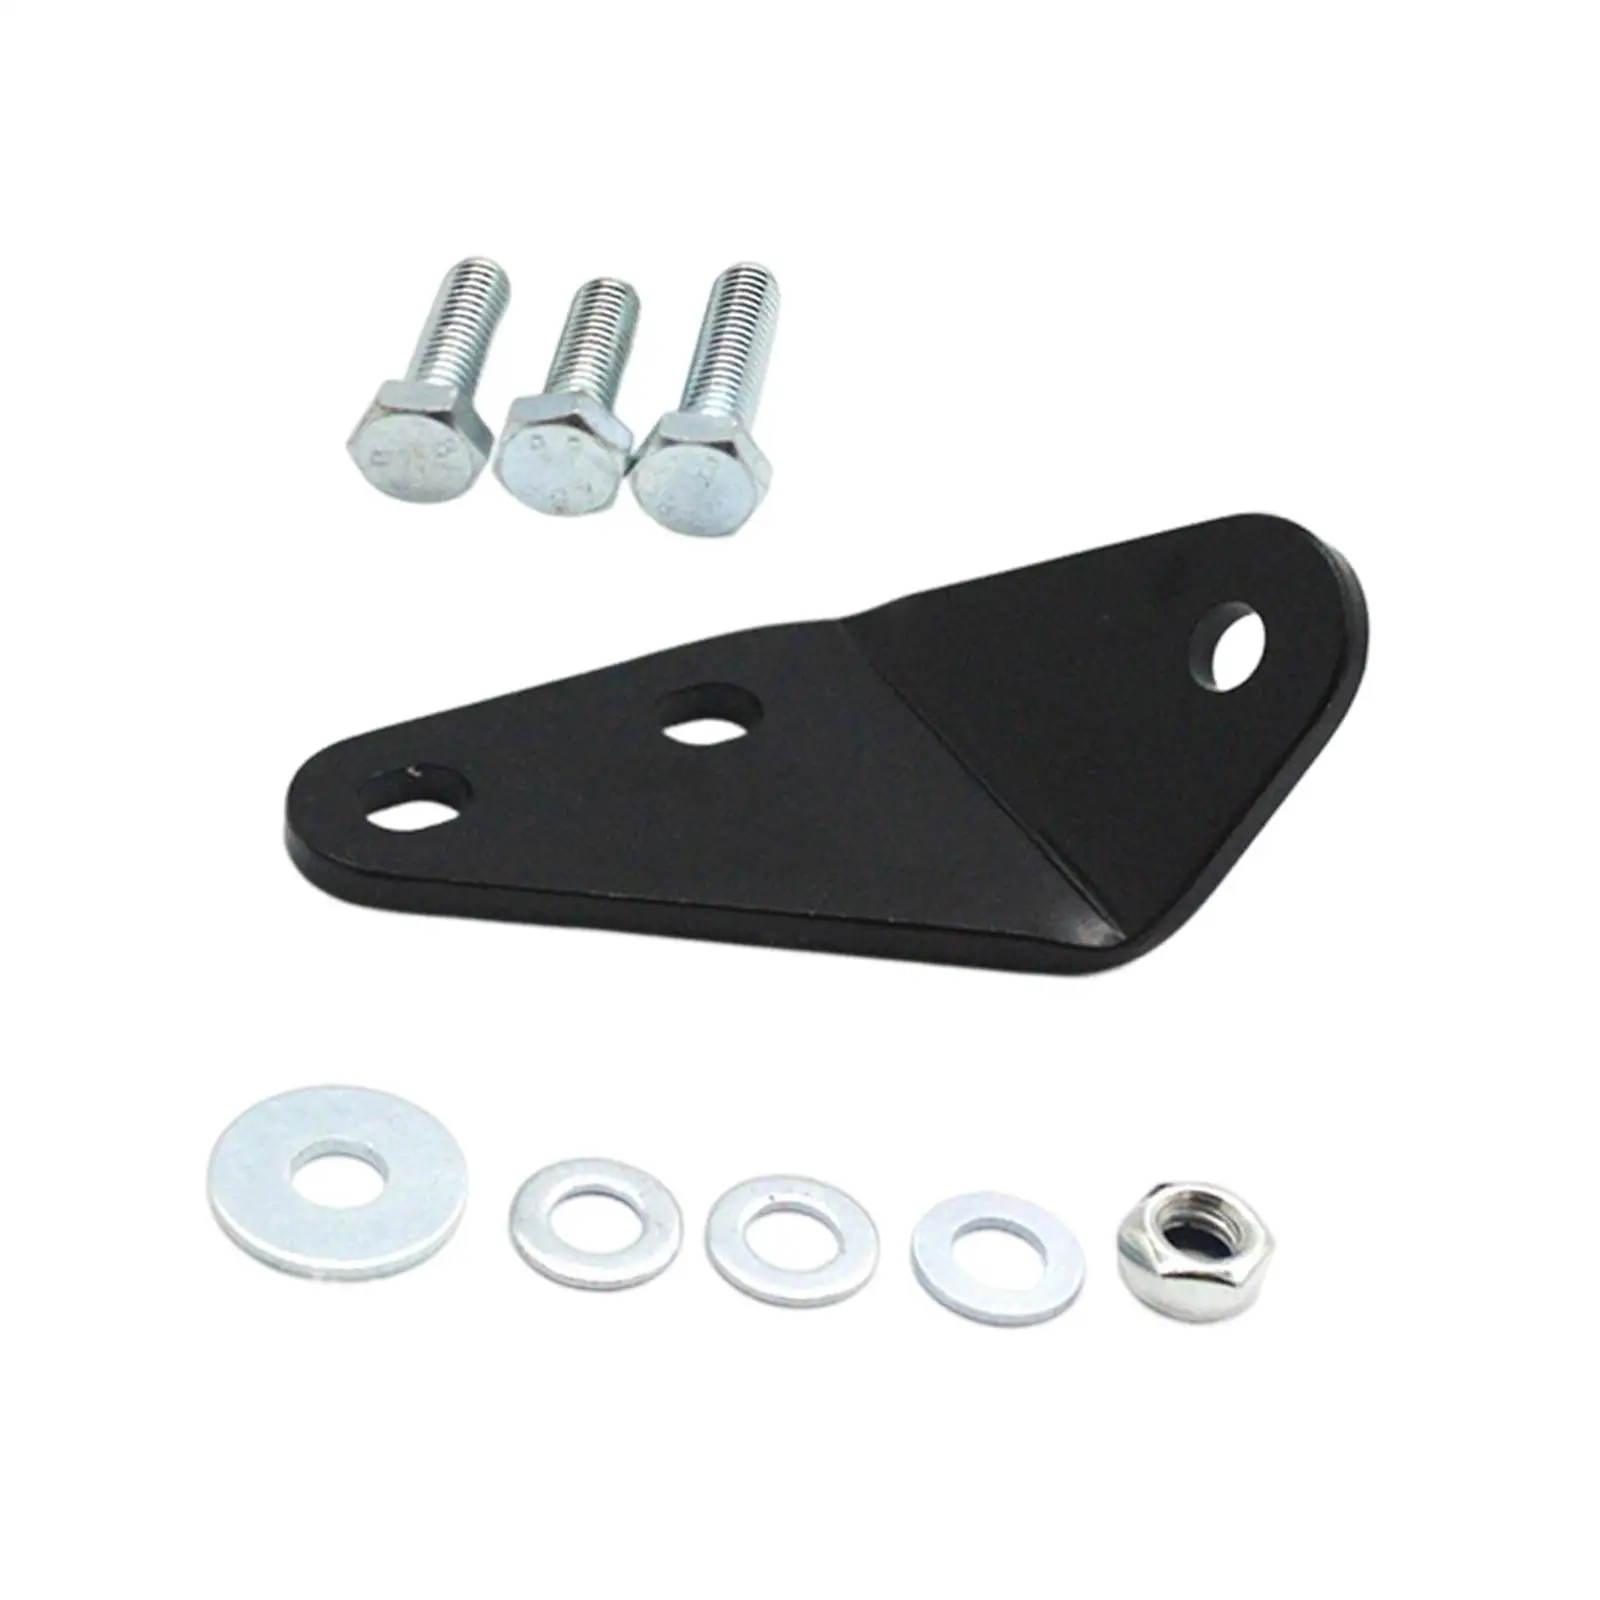 Clutch Pedal Repair Bracket High Quality for Volkswagen T4 Transporter